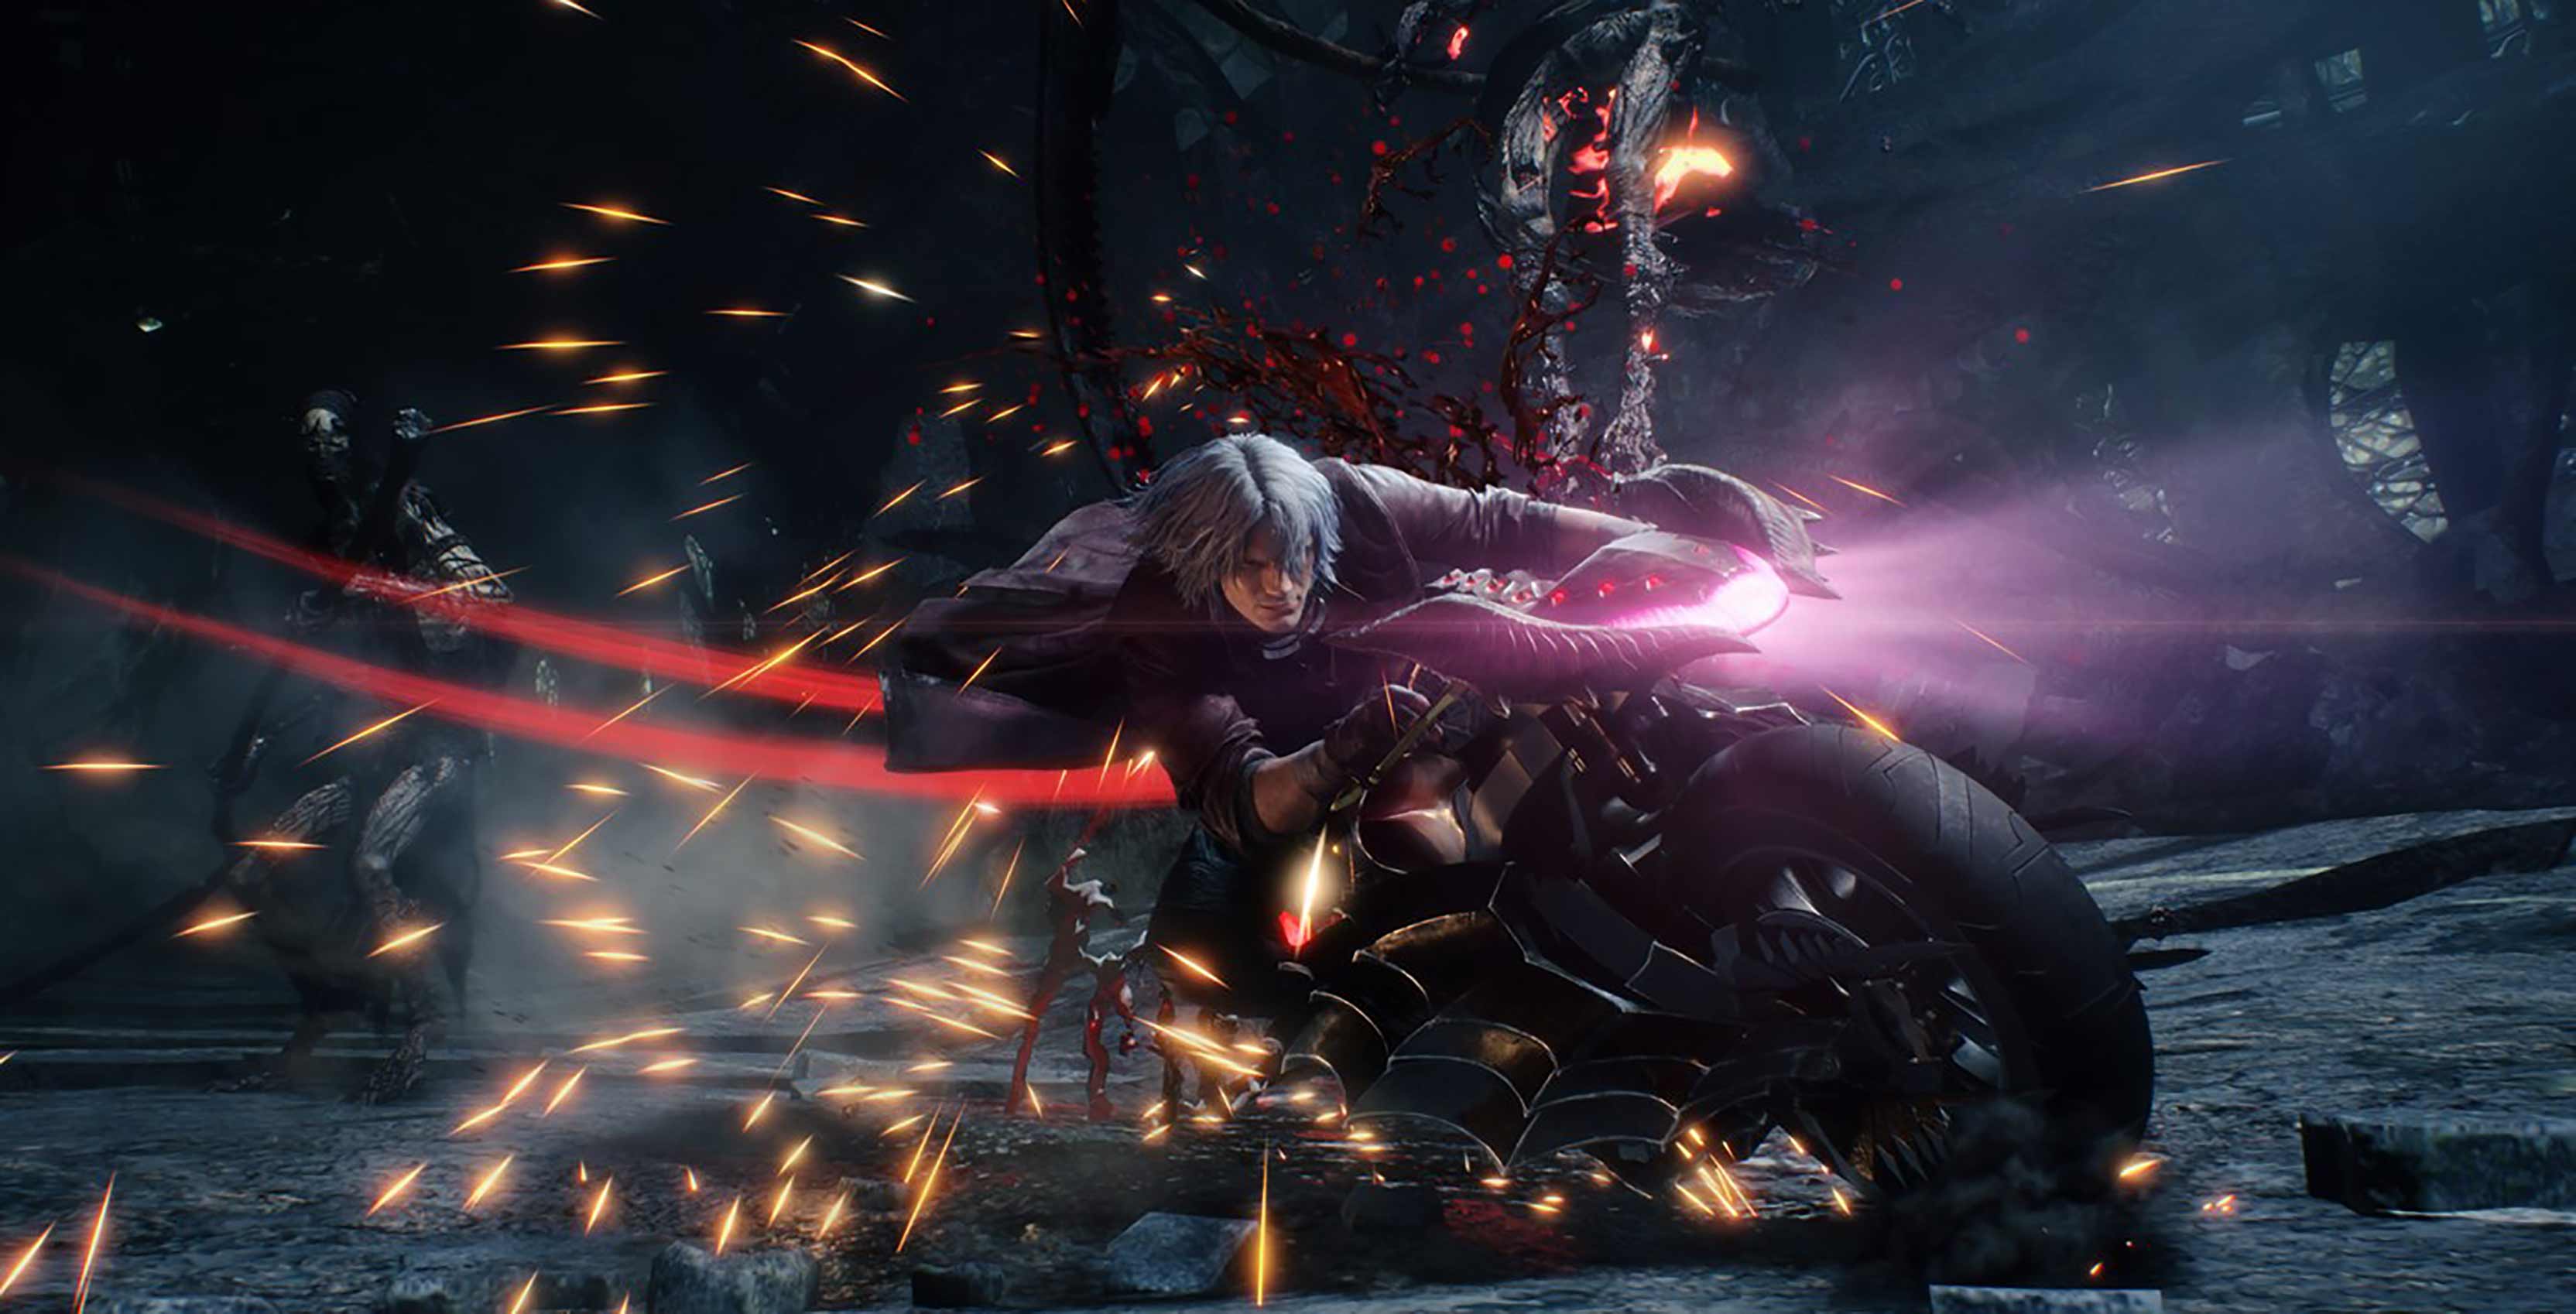 Devil May Cry 5 Dante on motorcycle